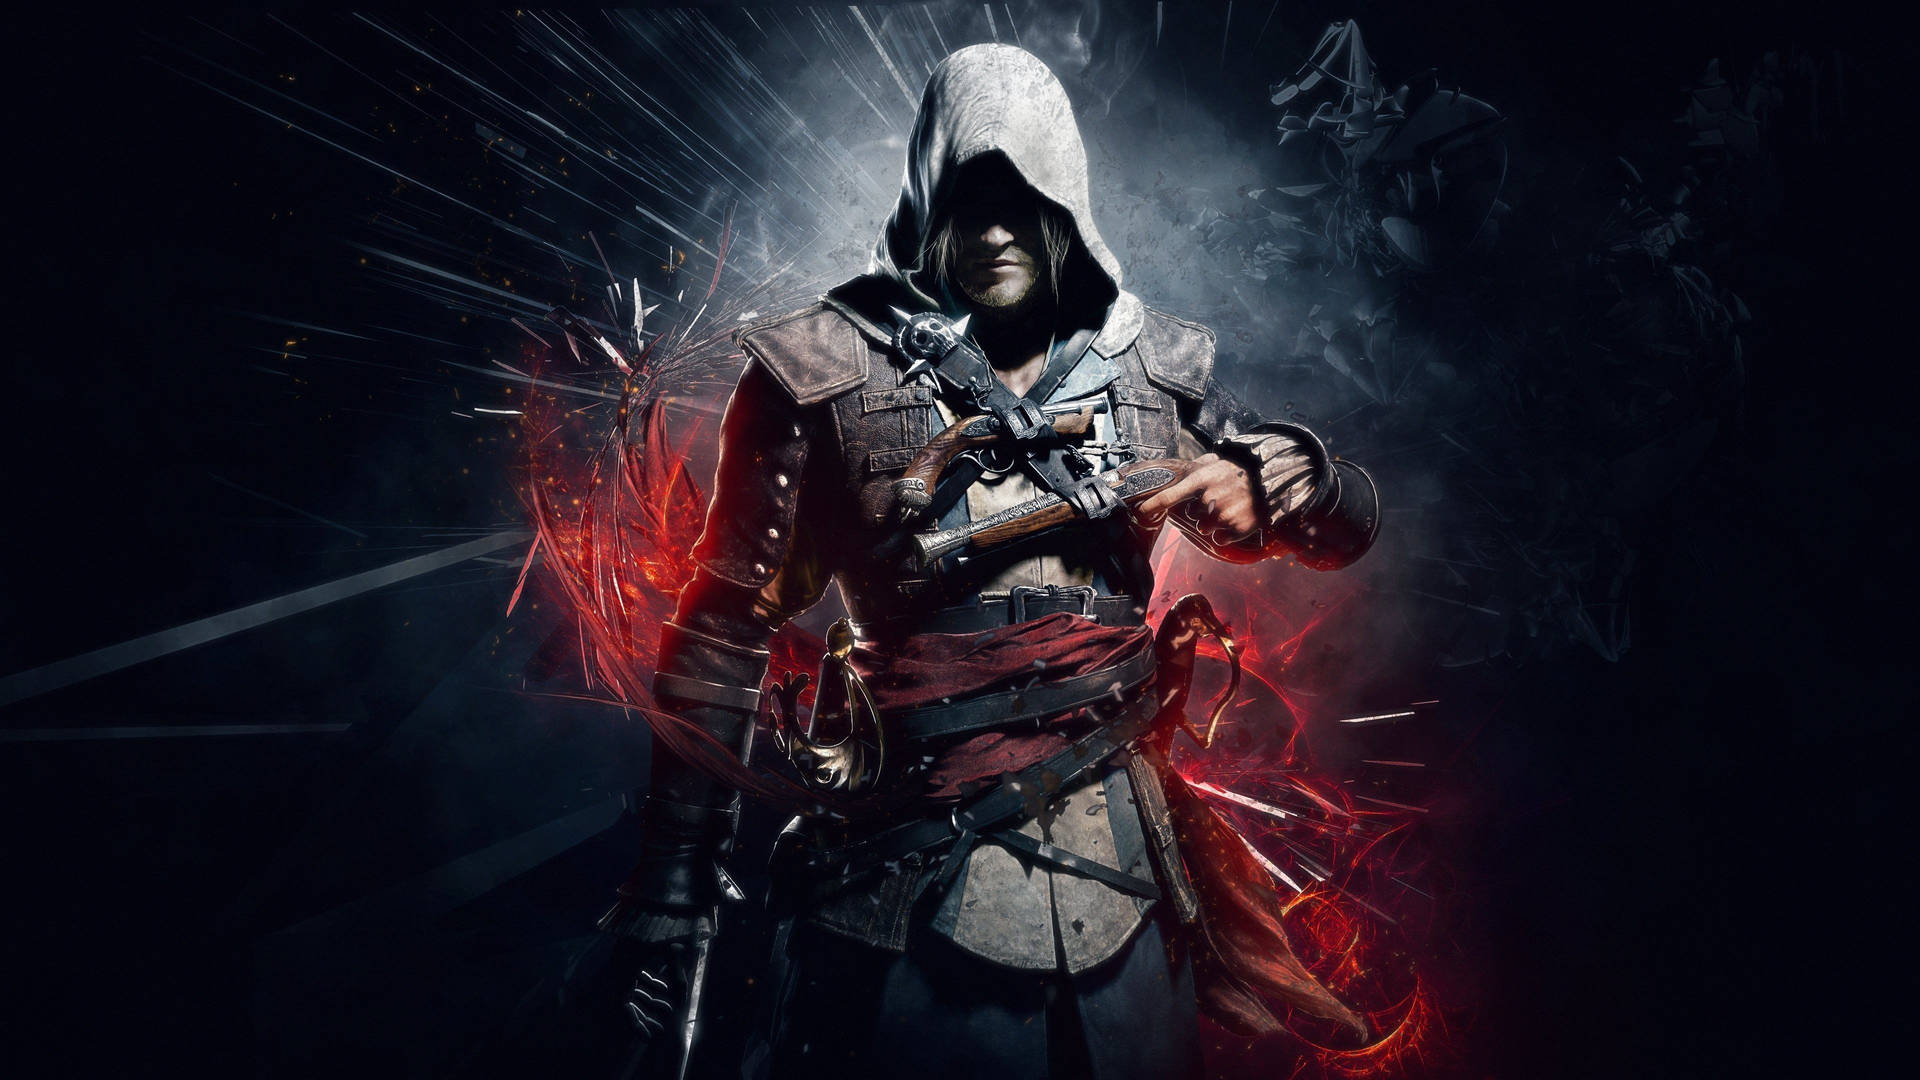 Hd Assassin's Creed Gaming Cover